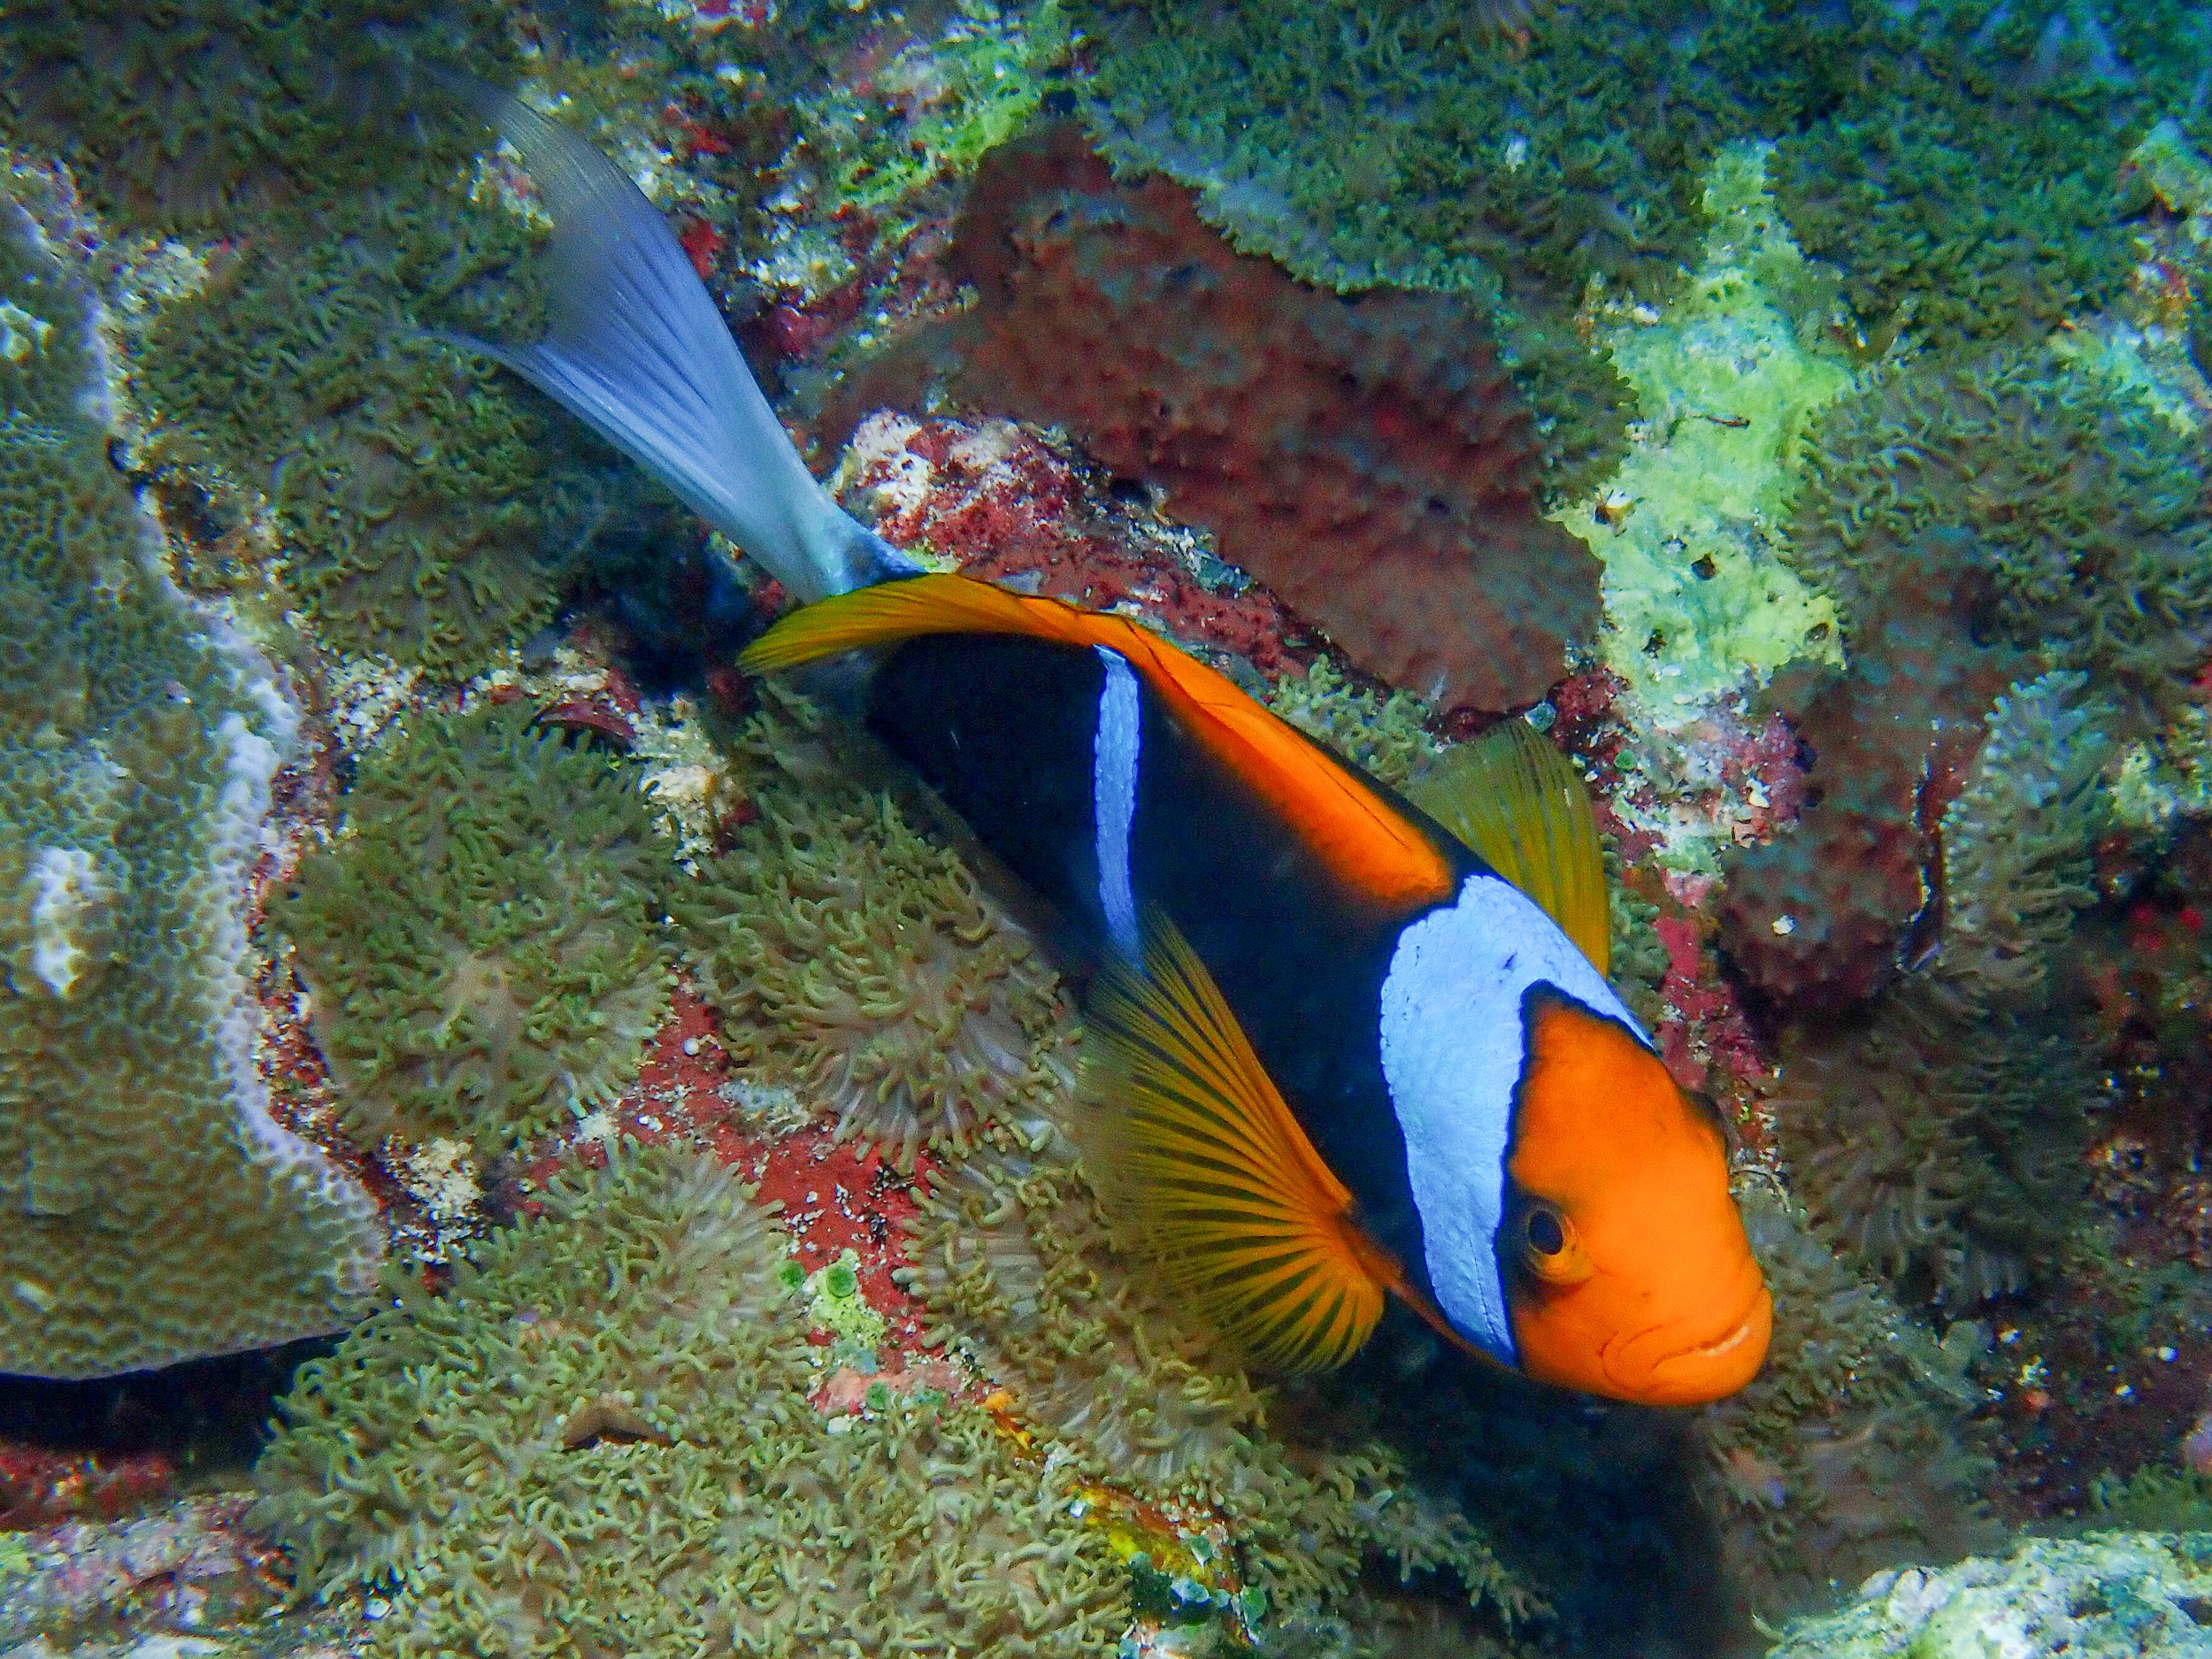 Orangefin anemonefish - Amphiprion chrysopterus, Dicky's Reef, Witu Islands